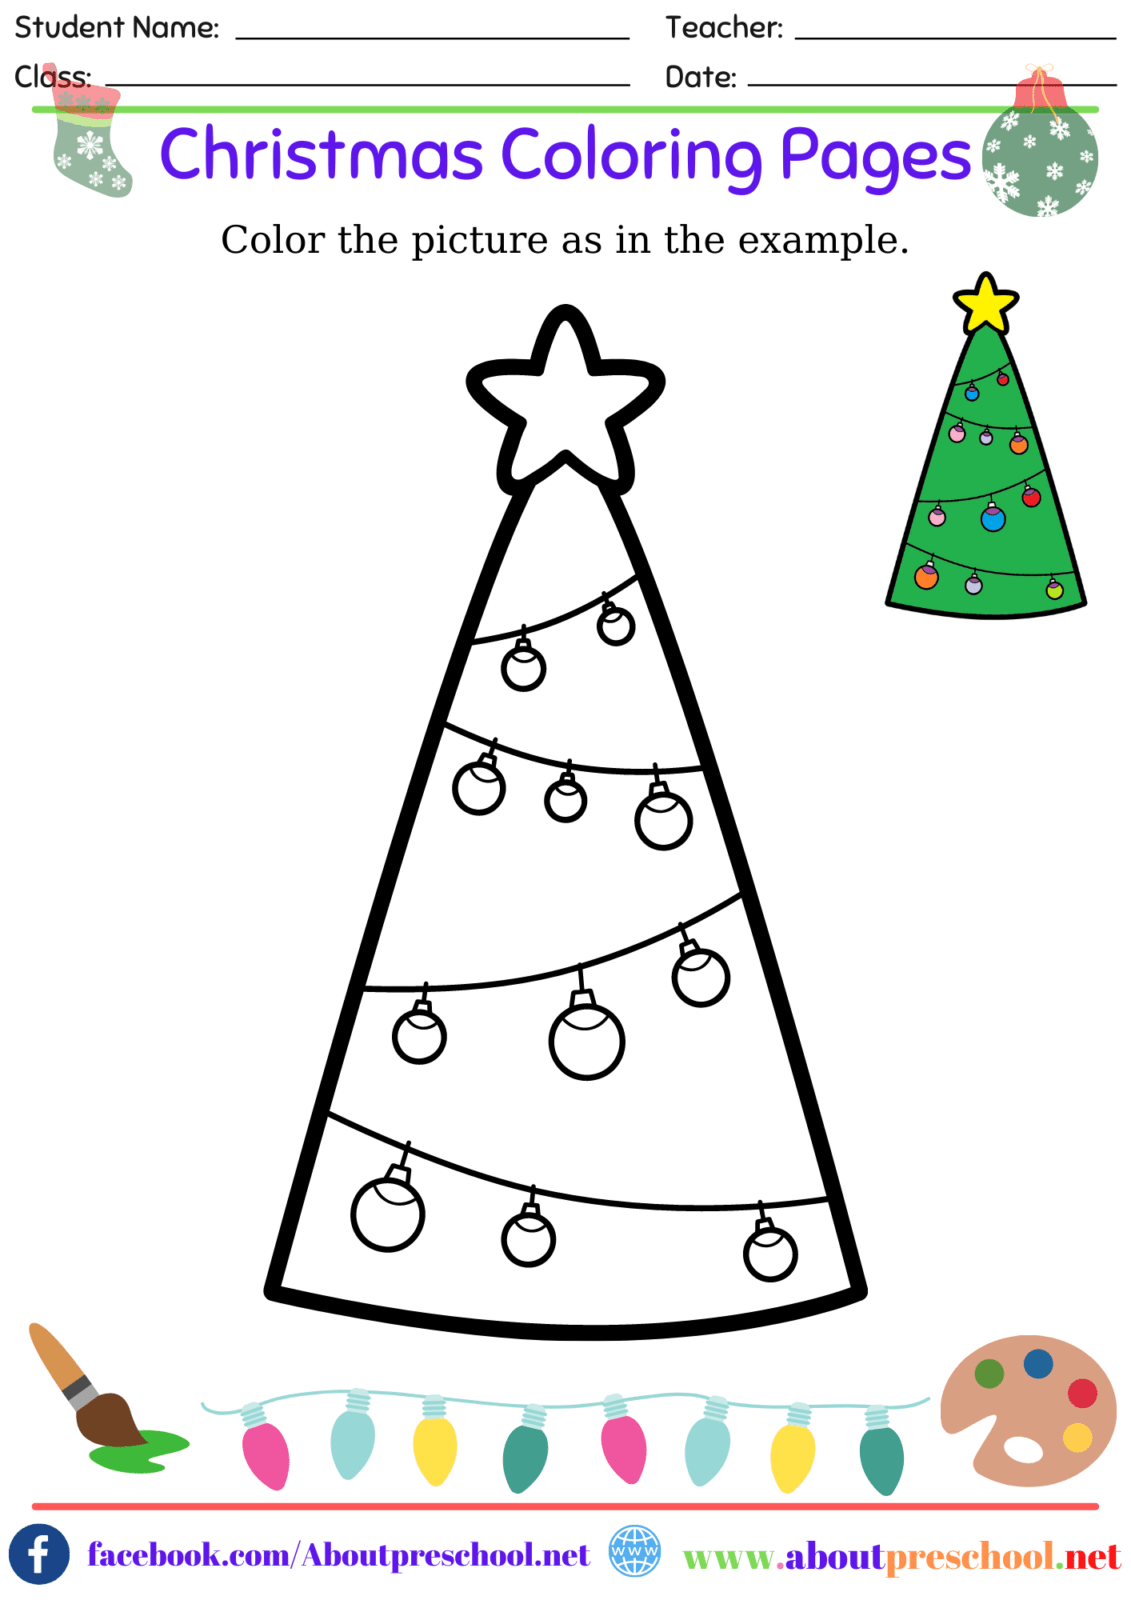 Christmas Coloring Pages 11